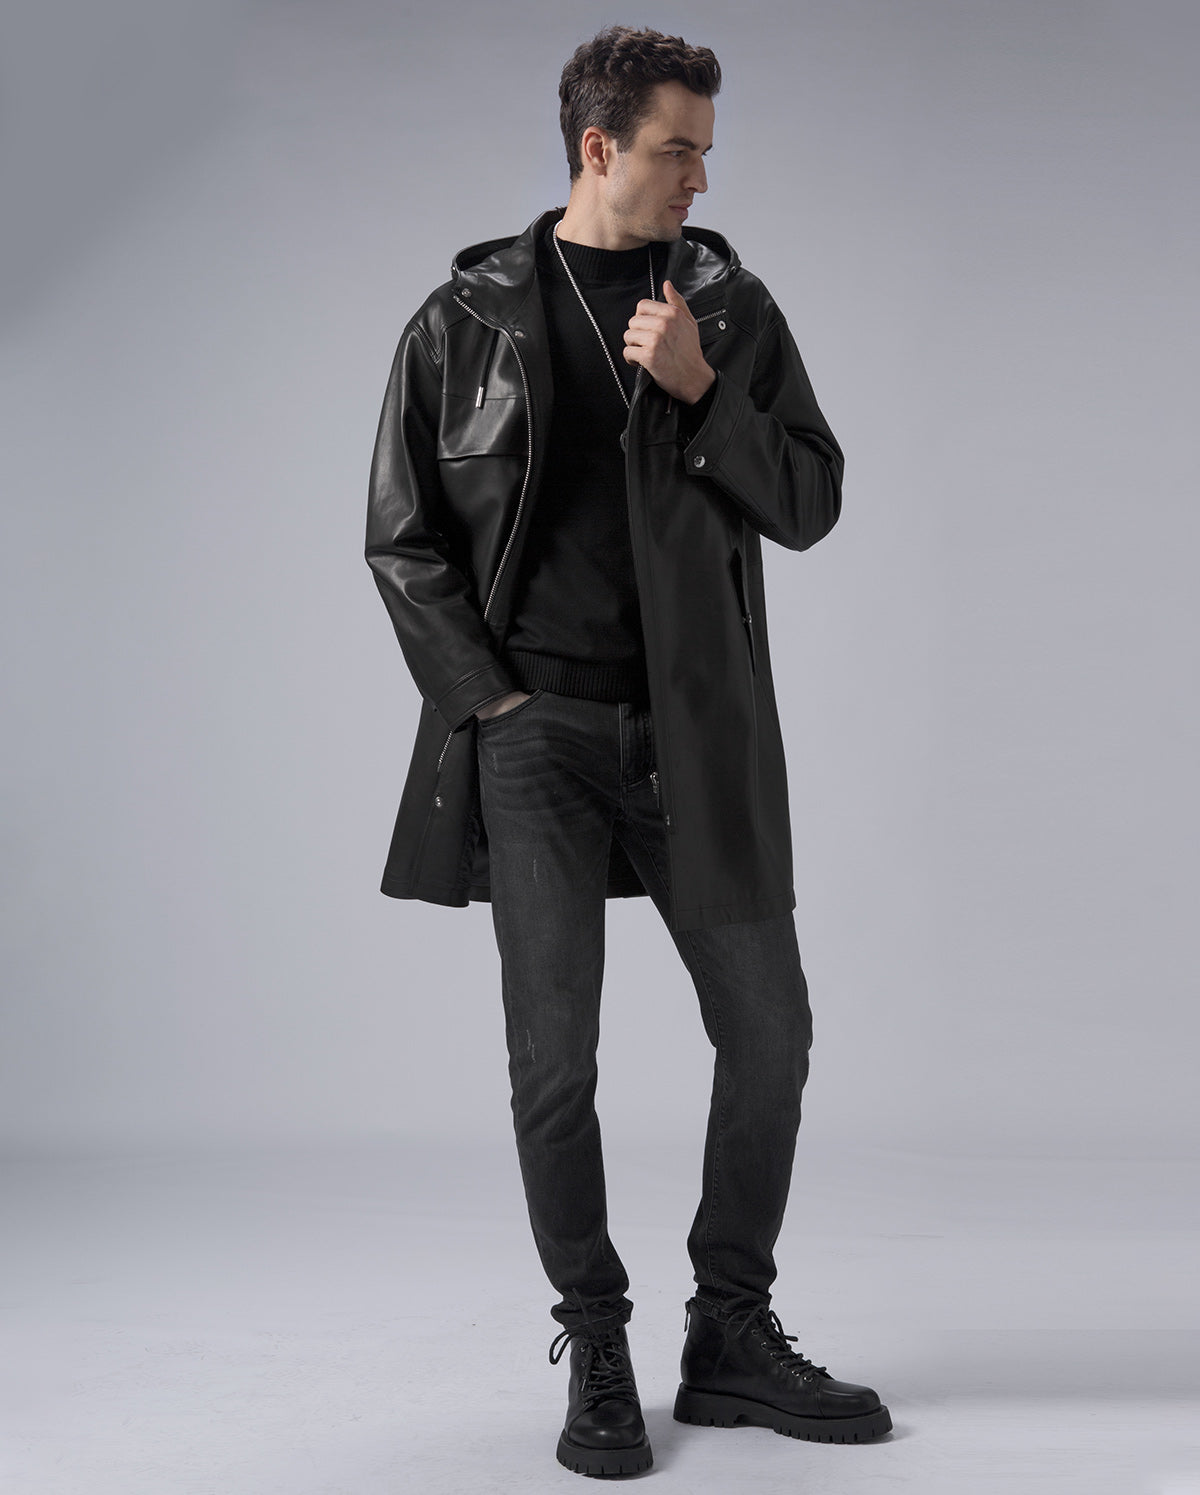 Black Leather Trench Coat Mens Hooded Leather Duster Coat